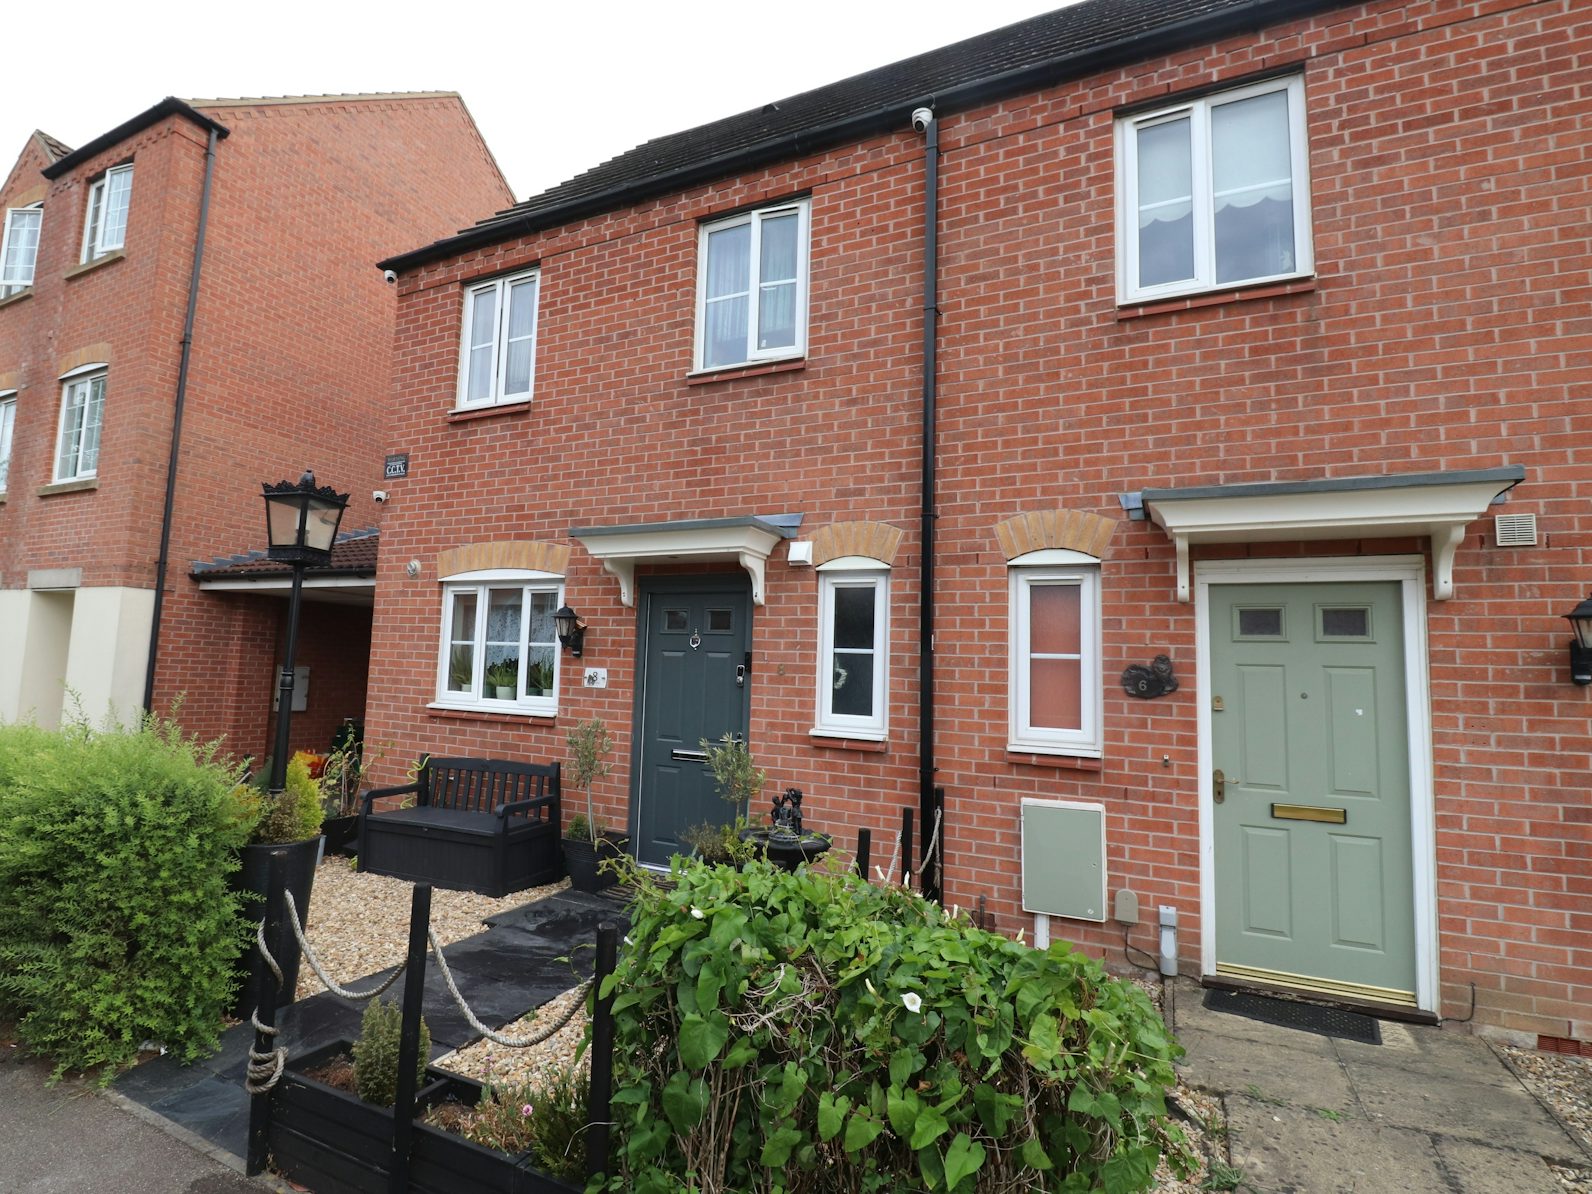 End of Terrace for sale on Saltern Drive Spalding, PE11